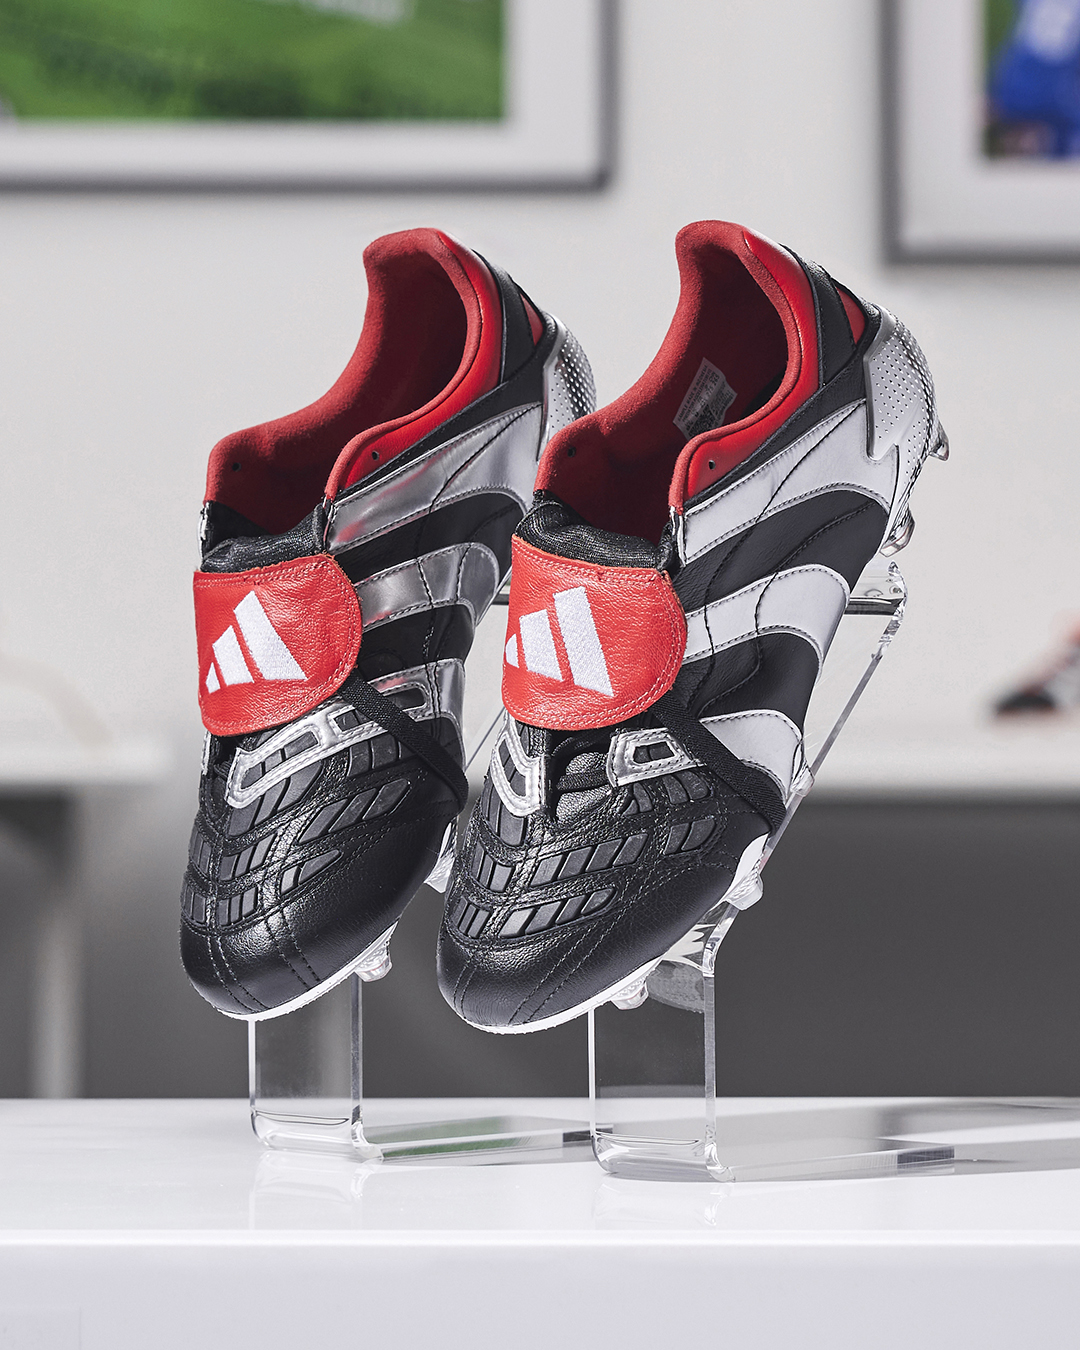 Sanders onkruid Snikken Pro:Direct Soccer on Twitter: "A Pro:Direct Soccer World Exclusive 🔥 Just  998 pairs of the adidas Predator Accelerator x Pro:Direct Soccer 25th  Anniversary football boots will be available on our UK (App